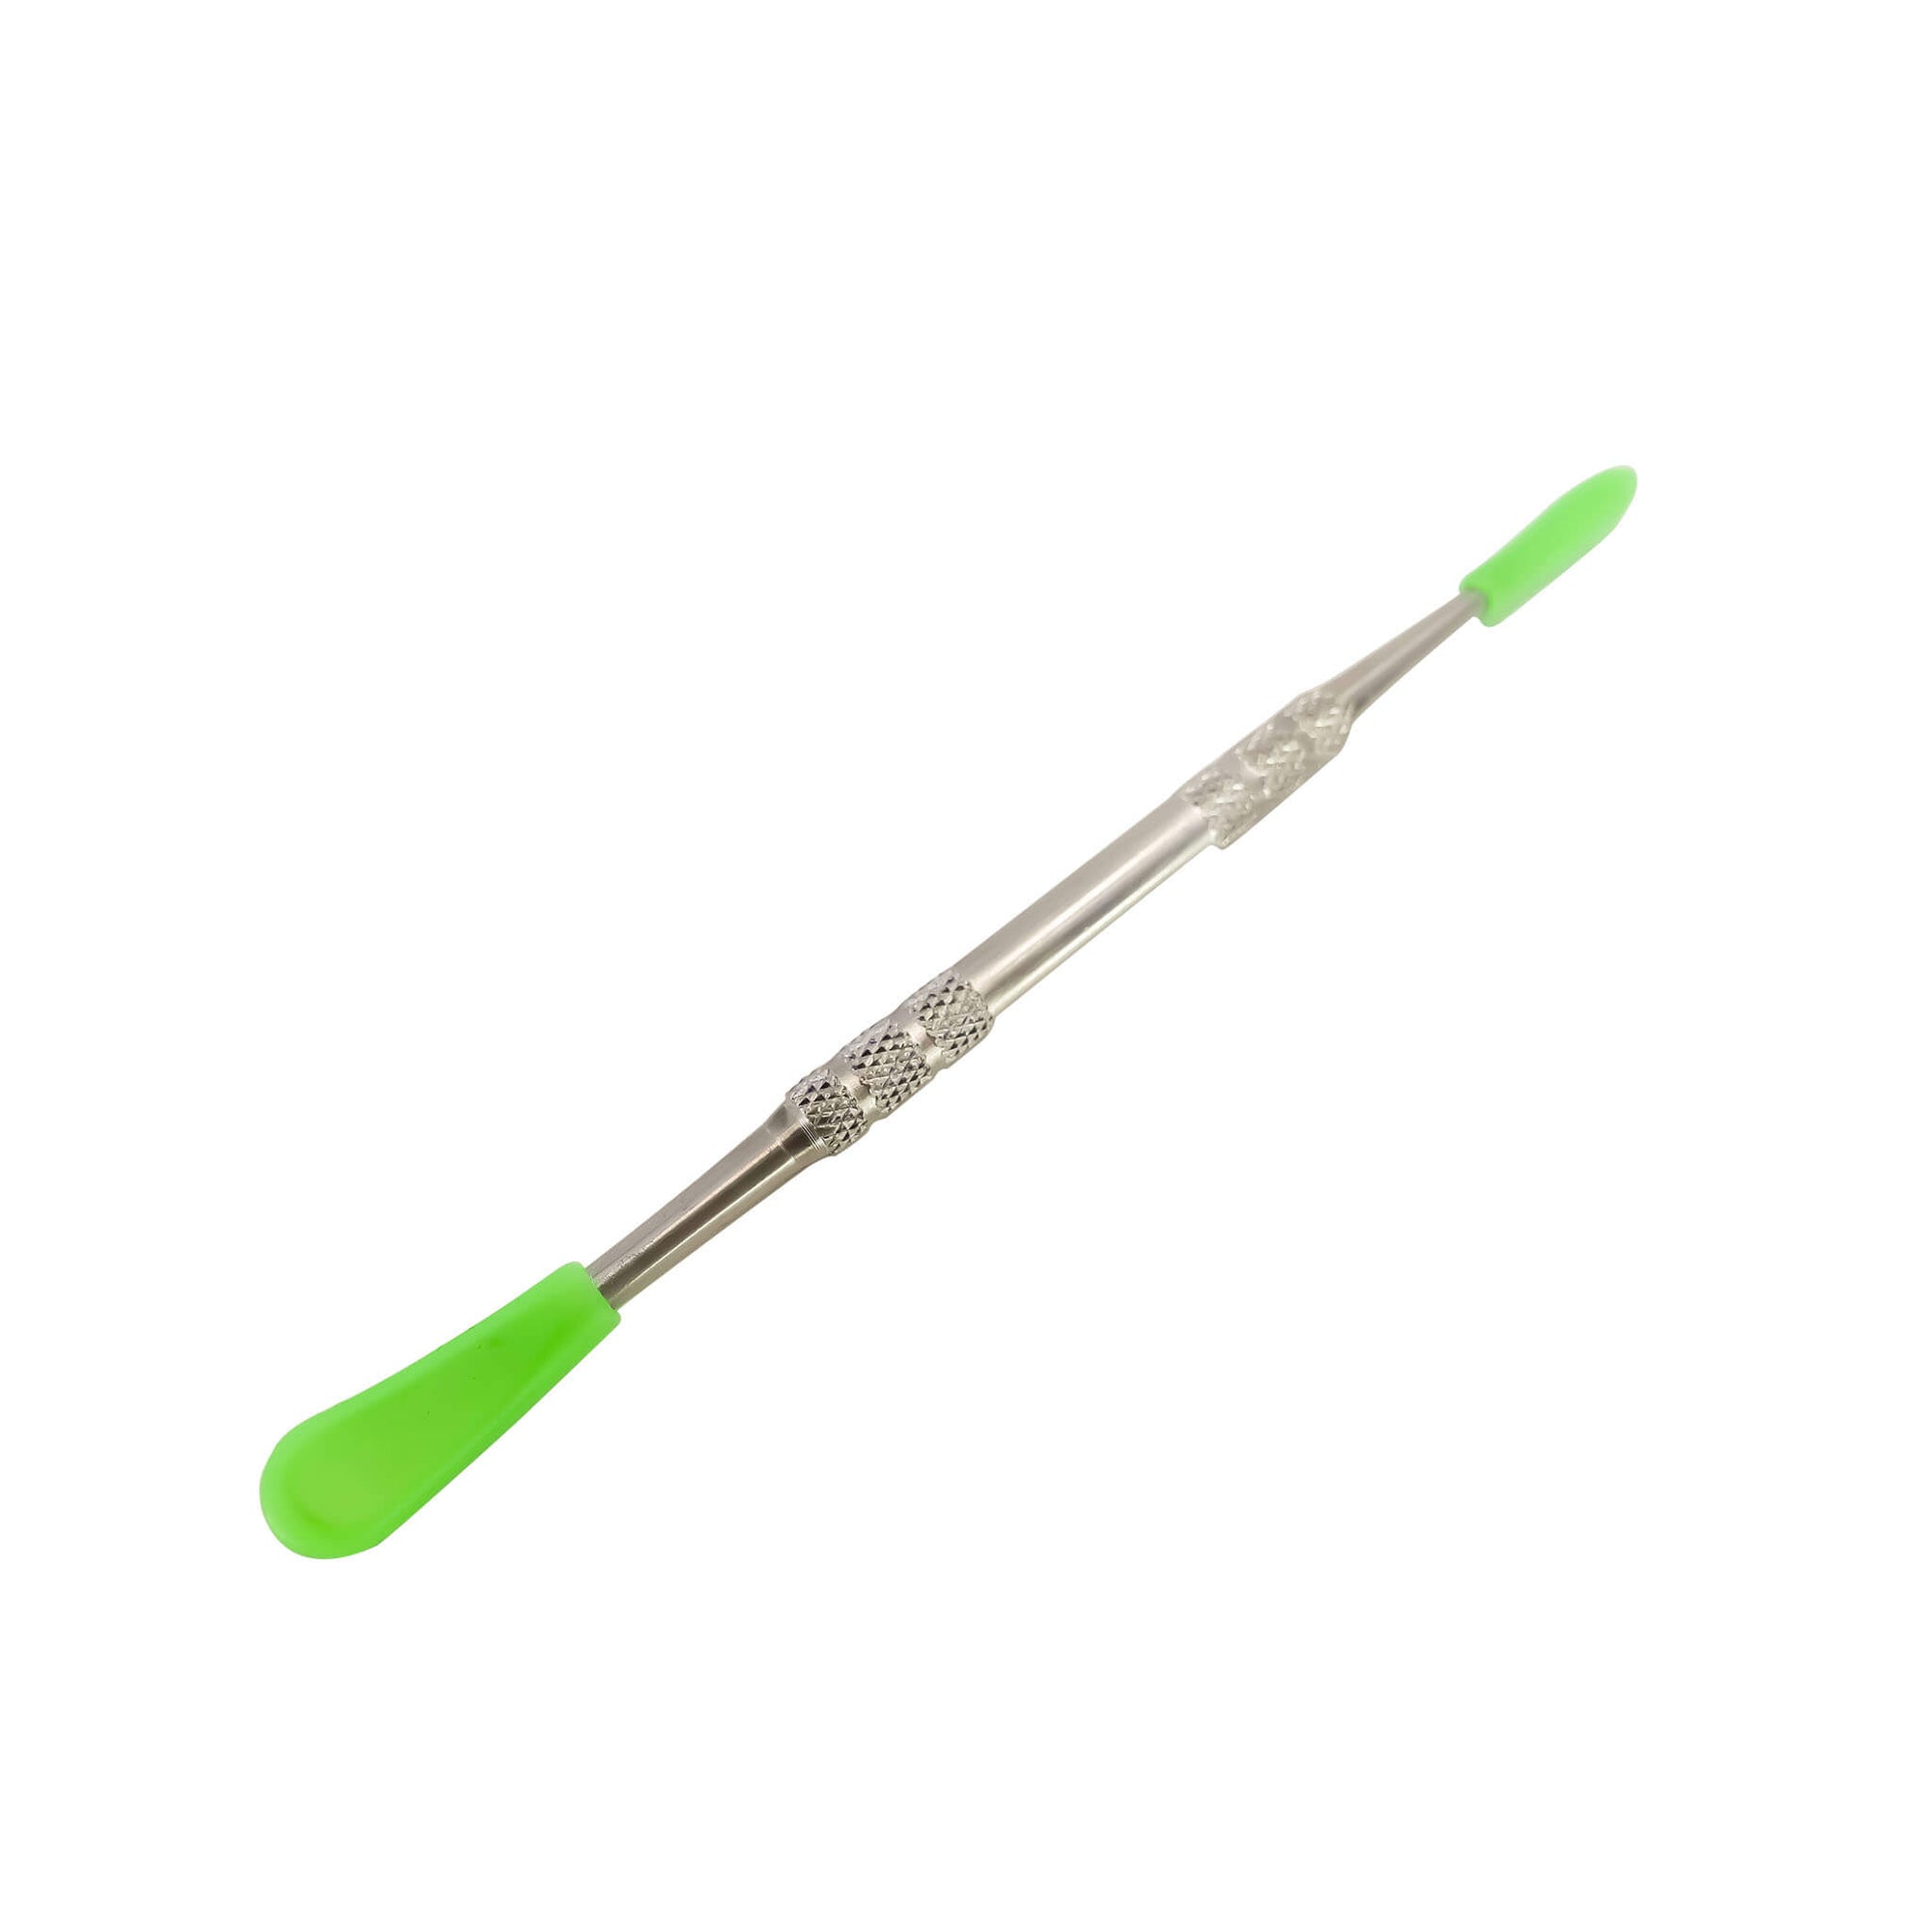 Wax Dabbers Usa Wax Atomizer Shovel Tools Stainless Steel Dabber Tool Wax  Tool Dry Herb Tool The Lowest Price Dab Tools Vax Atomizer From Cigstore,  $1.05